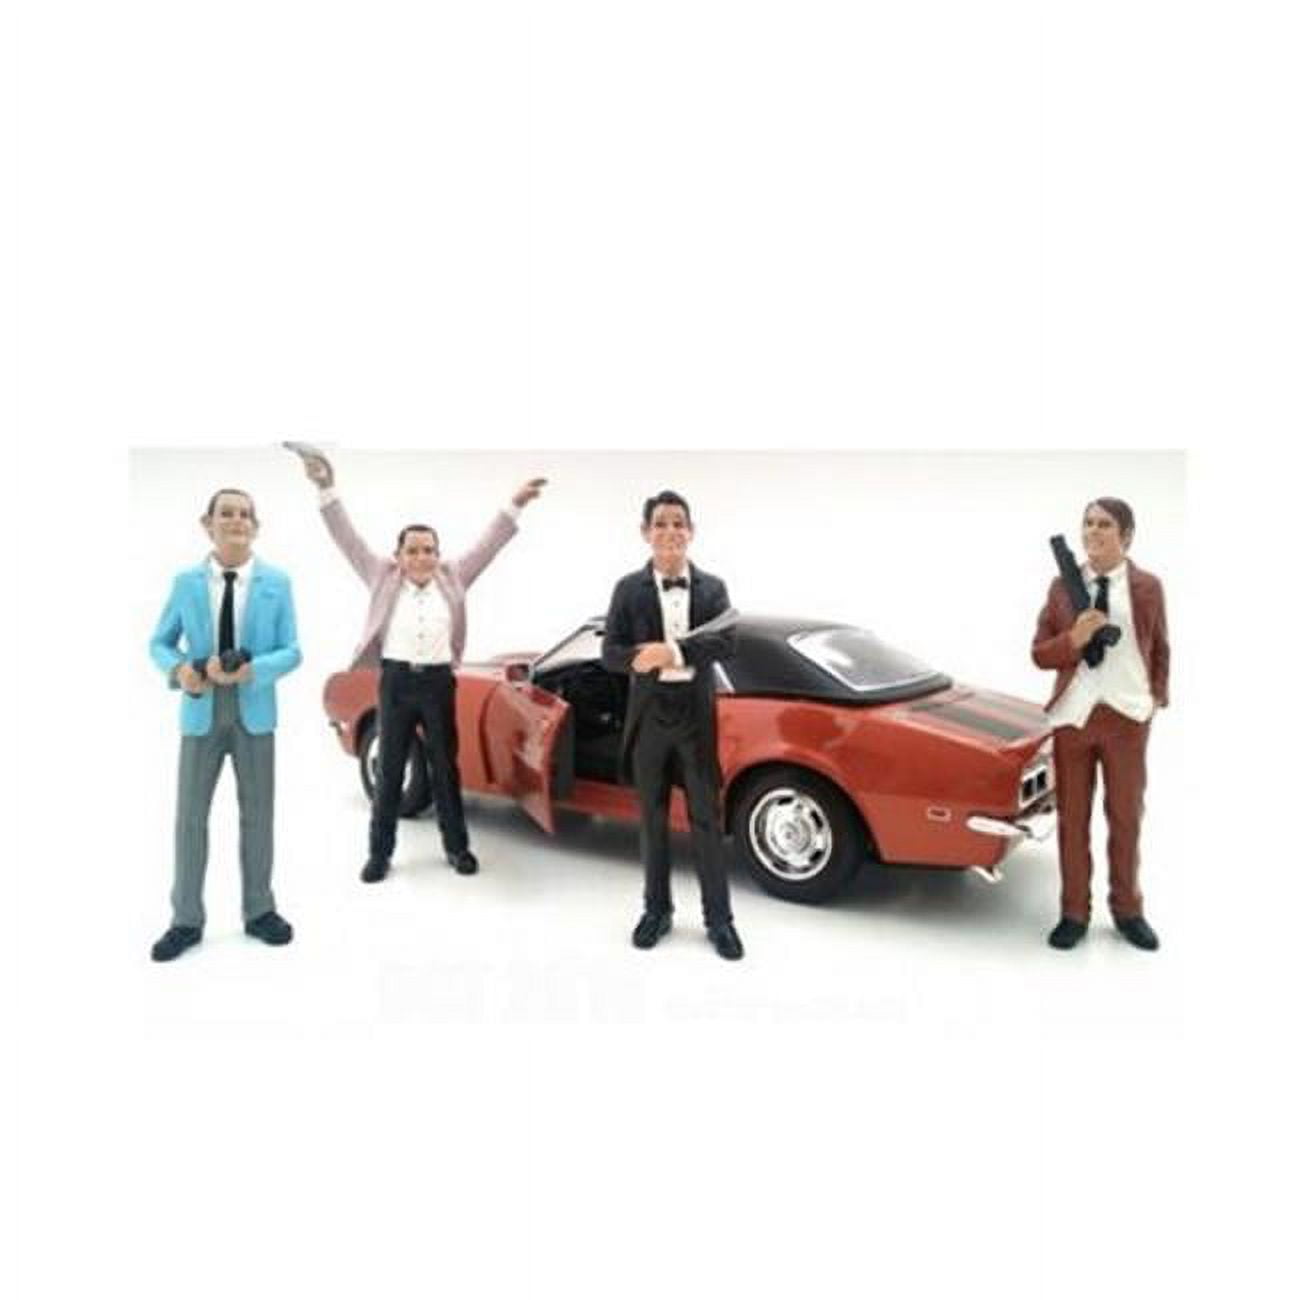 23921-23922-23923-23924 The Robbers Figure Set For 1-24 Scale Model, 4 Piece